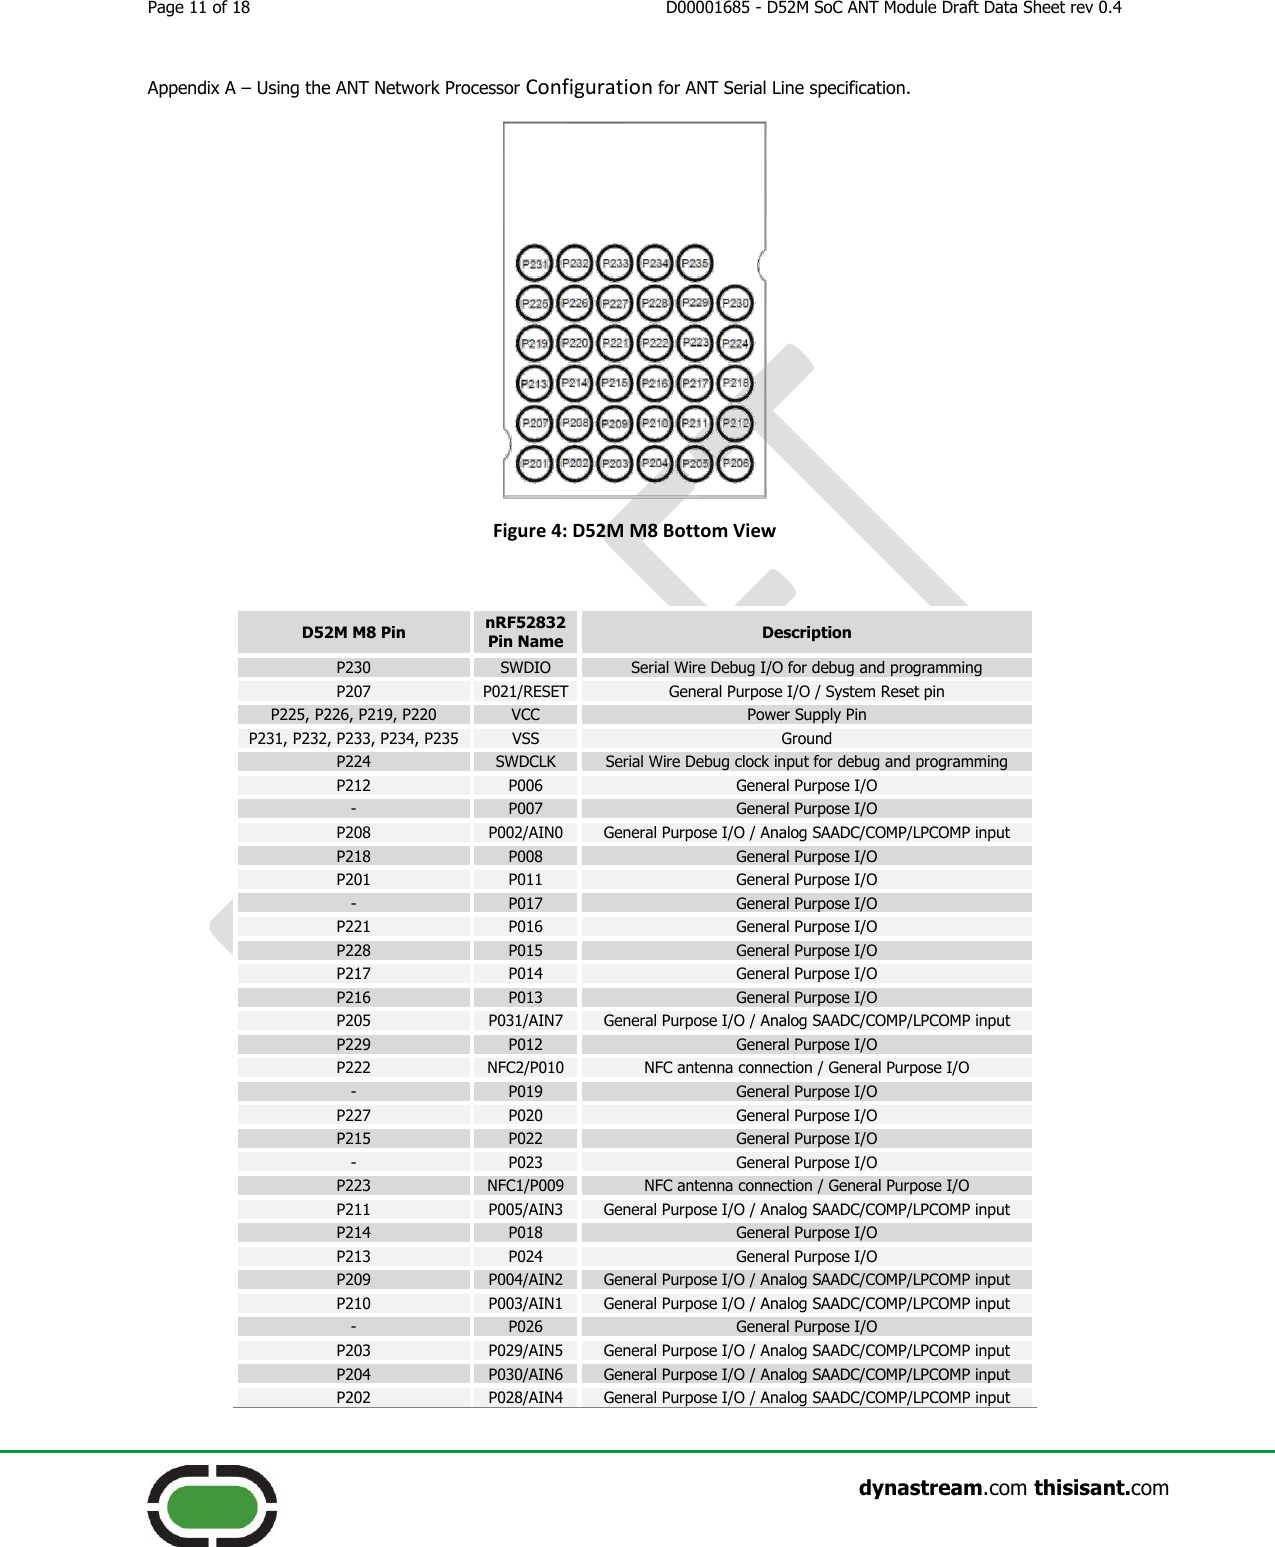 Page 11 of 18  D00001685 - D52M SoC ANT Module Draft Data Sheet rev 0.4                    dynastream.com thisisant.com Appendix A – Using the ANT Network Processor Configuration for ANT Serial Line specification.  Figure 4: D52M M8 Bottom View  D52M M8 Pin nRF52832 Pin Name Description P230 SWDIO Serial Wire Debug I/O for debug and programming P207 P021/RESET General Purpose I/O / System Reset pin P225, P226, P219, P220 VCC Power Supply Pin P231, P232, P233, P234, P235 VSS Ground P224 SWDCLK Serial Wire Debug clock input for debug and programming P212 P006 General Purpose I/O  - P007 General Purpose I/O P208 P002/AIN0 General Purpose I/O / Analog SAADC/COMP/LPCOMP input P218 P008 General Purpose I/O P201 P011 General Purpose I/O - P017 General Purpose I/O P221 P016 General Purpose I/O P228 P015 General Purpose I/O P217 P014 General Purpose I/O P216 P013 General Purpose I/O P205 P031/AIN7 General Purpose I/O / Analog SAADC/COMP/LPCOMP input P229 P012 General Purpose I/O P222 NFC2/P010 NFC antenna connection / General Purpose I/O - P019 General Purpose I/O P227 P020 General Purpose I/O P215 P022 General Purpose I/O - P023 General Purpose I/O P223 NFC1/P009 NFC antenna connection / General Purpose I/O P211 P005/AIN3 General Purpose I/O / Analog SAADC/COMP/LPCOMP input P214 P018 General Purpose I/O P213 P024 General Purpose I/O P209 P004/AIN2 General Purpose I/O / Analog SAADC/COMP/LPCOMP input P210 P003/AIN1 General Purpose I/O / Analog SAADC/COMP/LPCOMP input - P026 General Purpose I/O P203 P029/AIN5 General Purpose I/O / Analog SAADC/COMP/LPCOMP input P204 P030/AIN6 General Purpose I/O / Analog SAADC/COMP/LPCOMP input P202 P028/AIN4 General Purpose I/O / Analog SAADC/COMP/LPCOMP input 